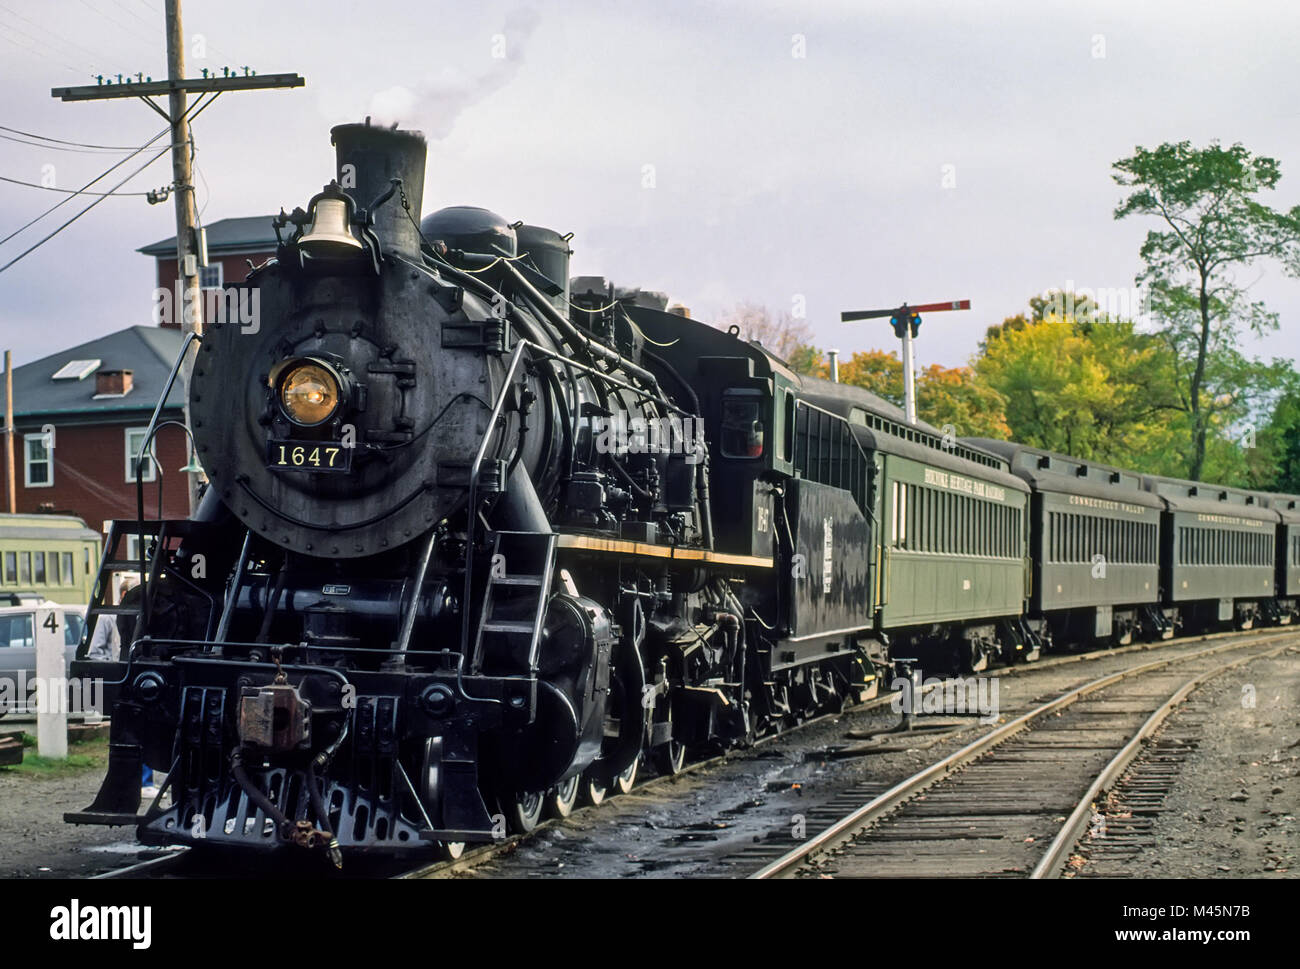 Valley Railroad 2-8-2 steam train locomotive #1647 departing the passenger depot in Essex, CT, USA. The train is part of the Essex Steam Train and Riv Stock Photo